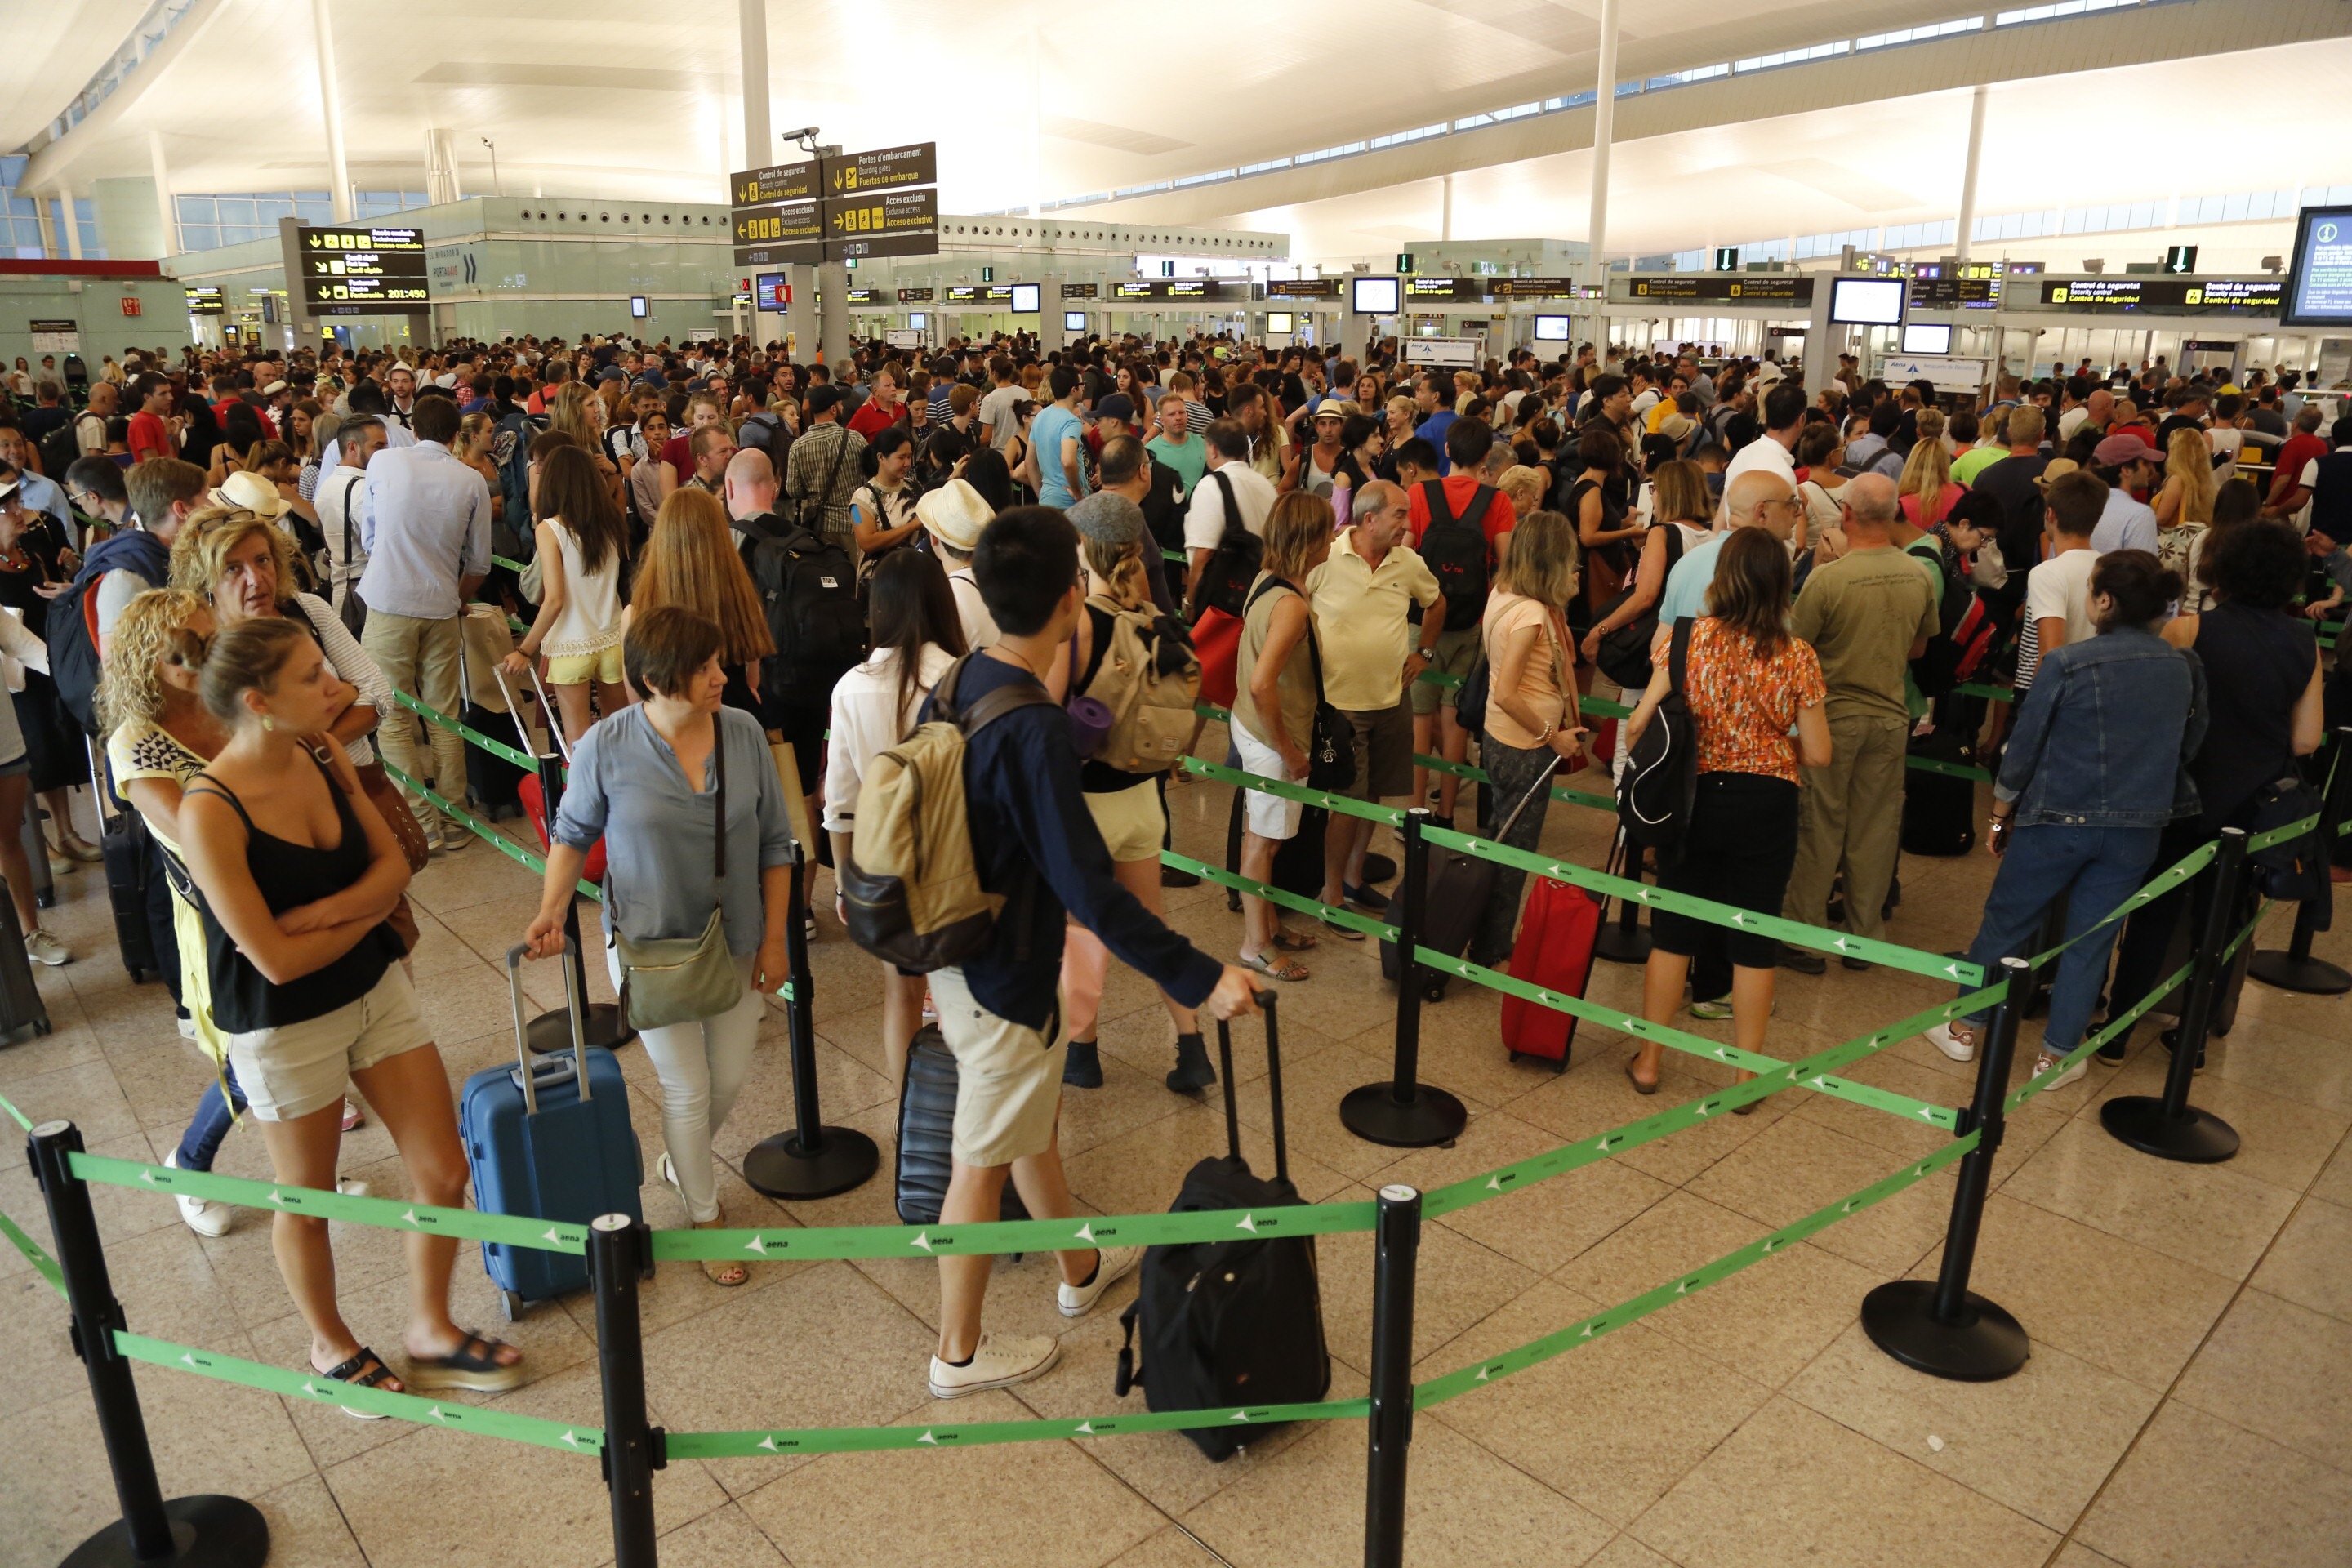 Anger and aggressive gestures during partial security strike at Barcelona's El Prat airport